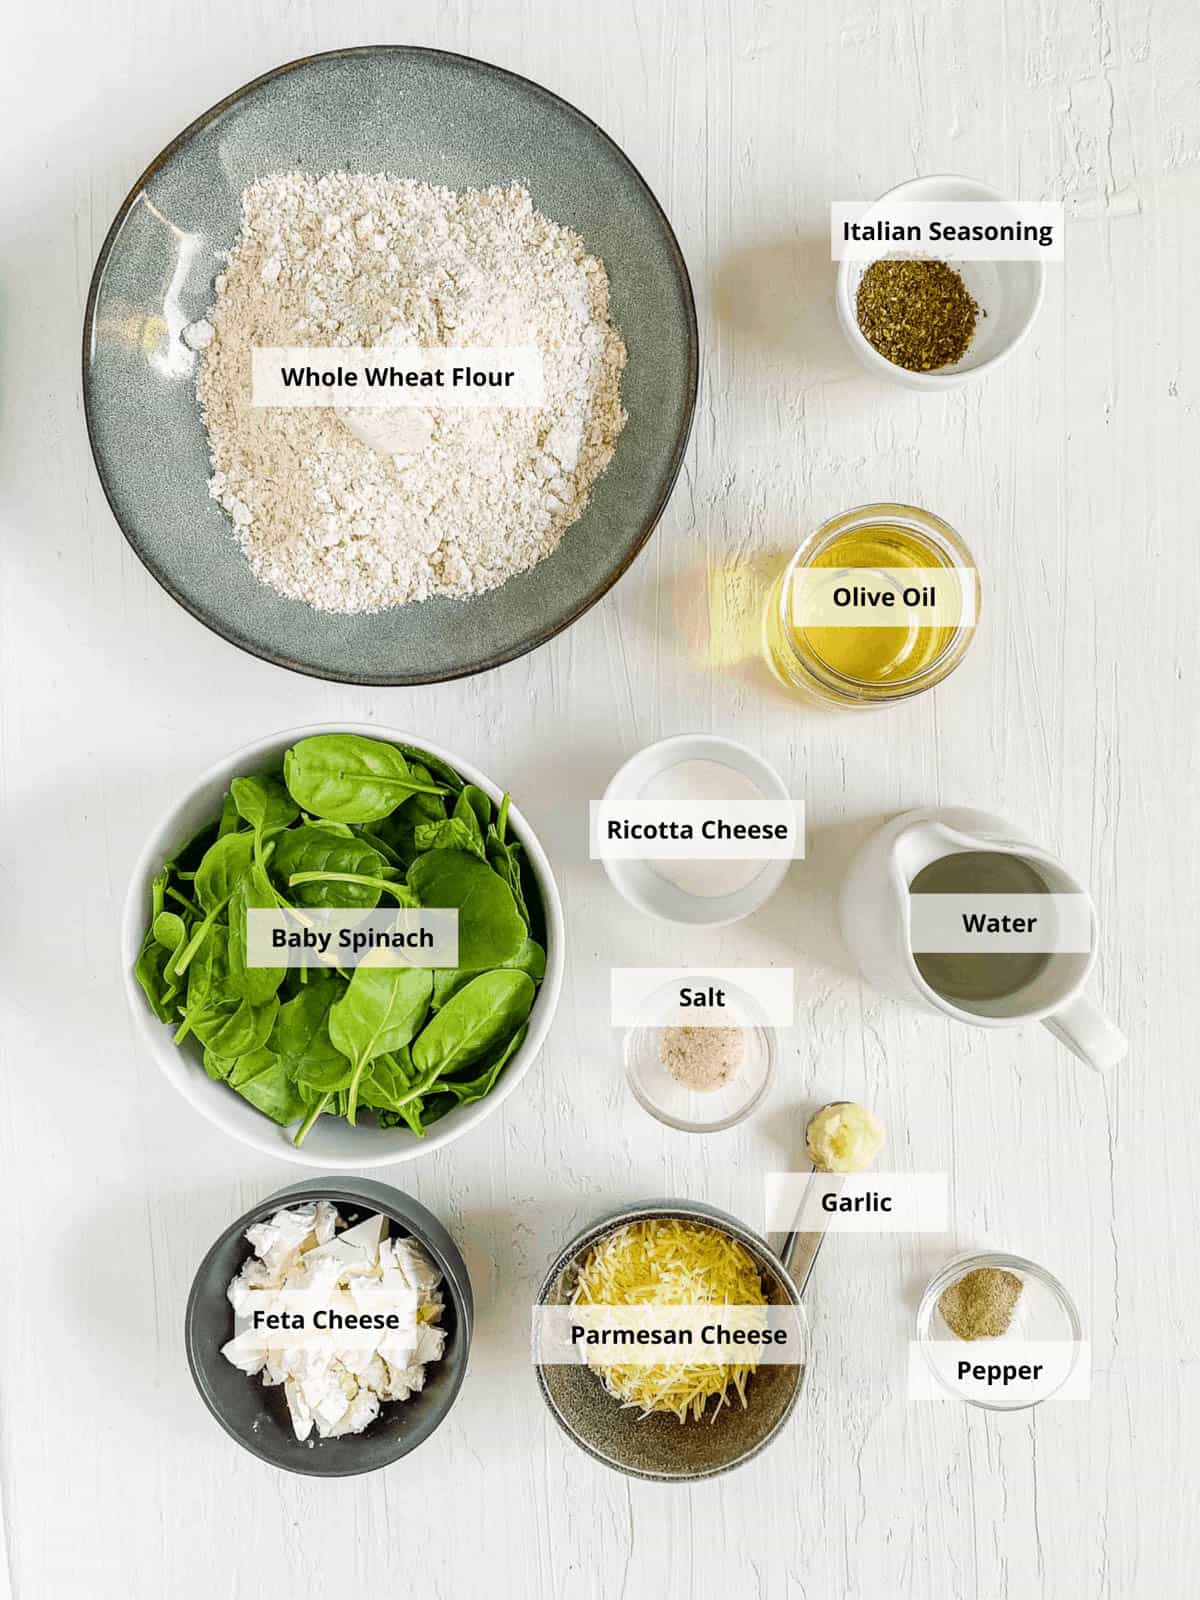 All of the ingredients for spinach pizza on a white background.